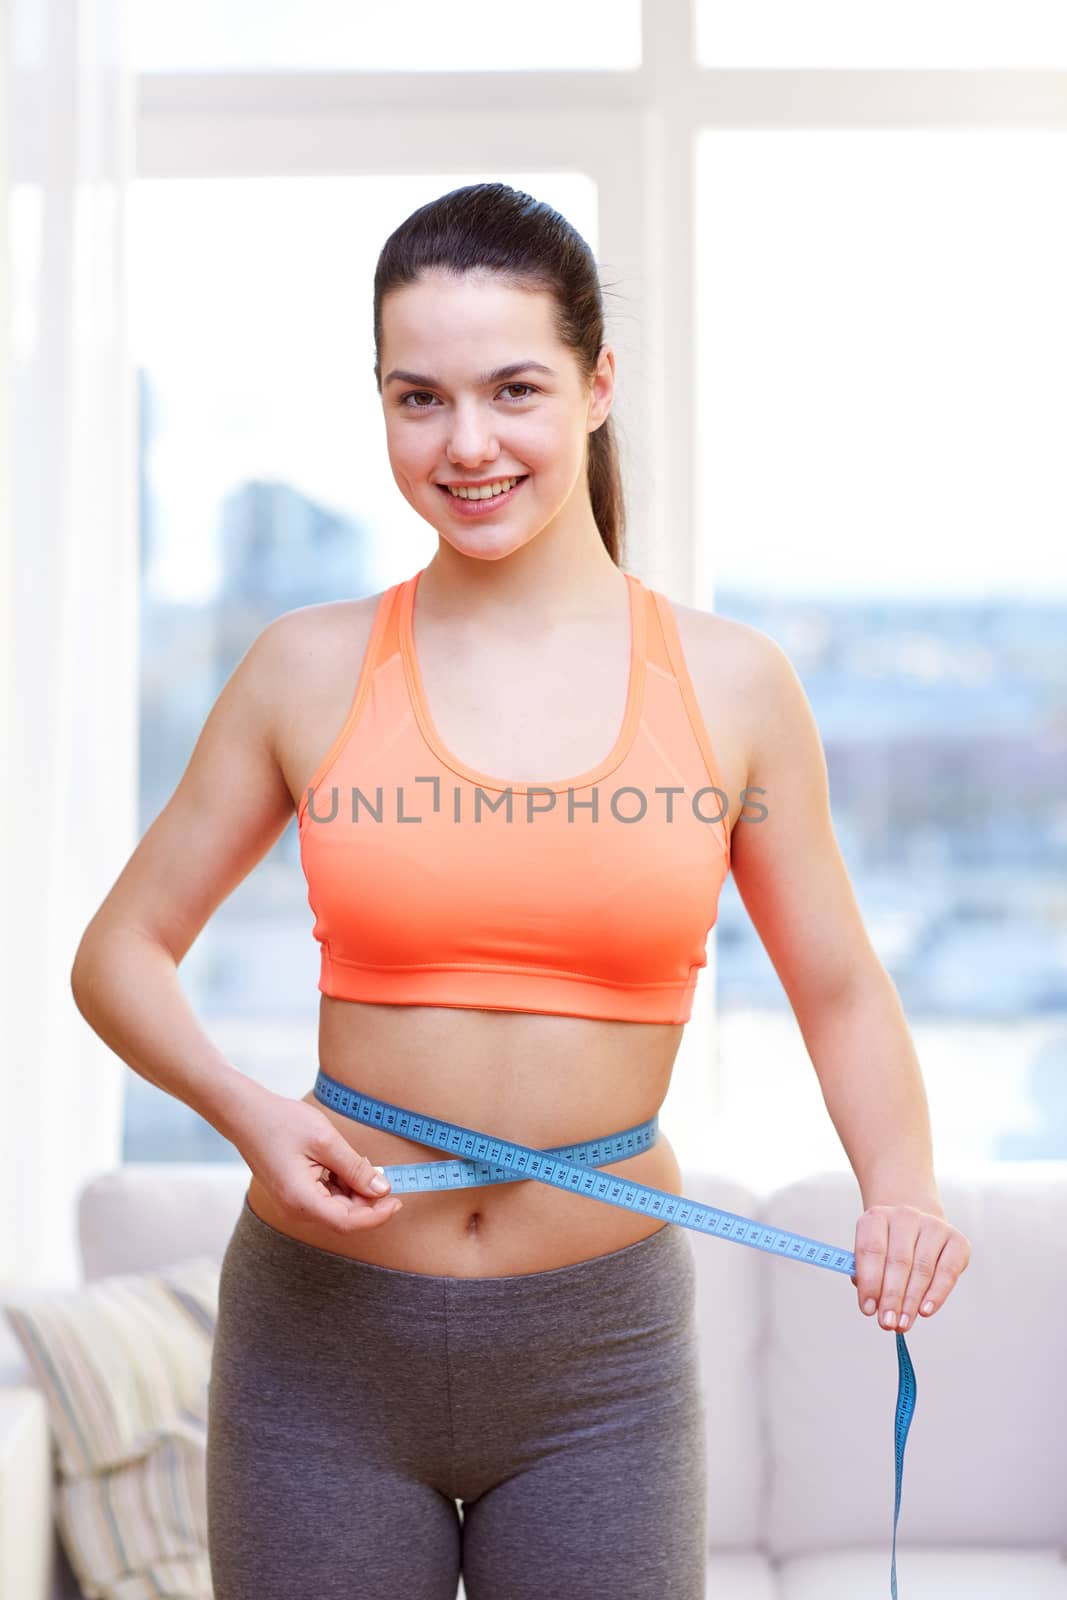 diet, slimming, sport, healthy lifestyle and people concept - happy sporty woman measuring her waist with tape at home